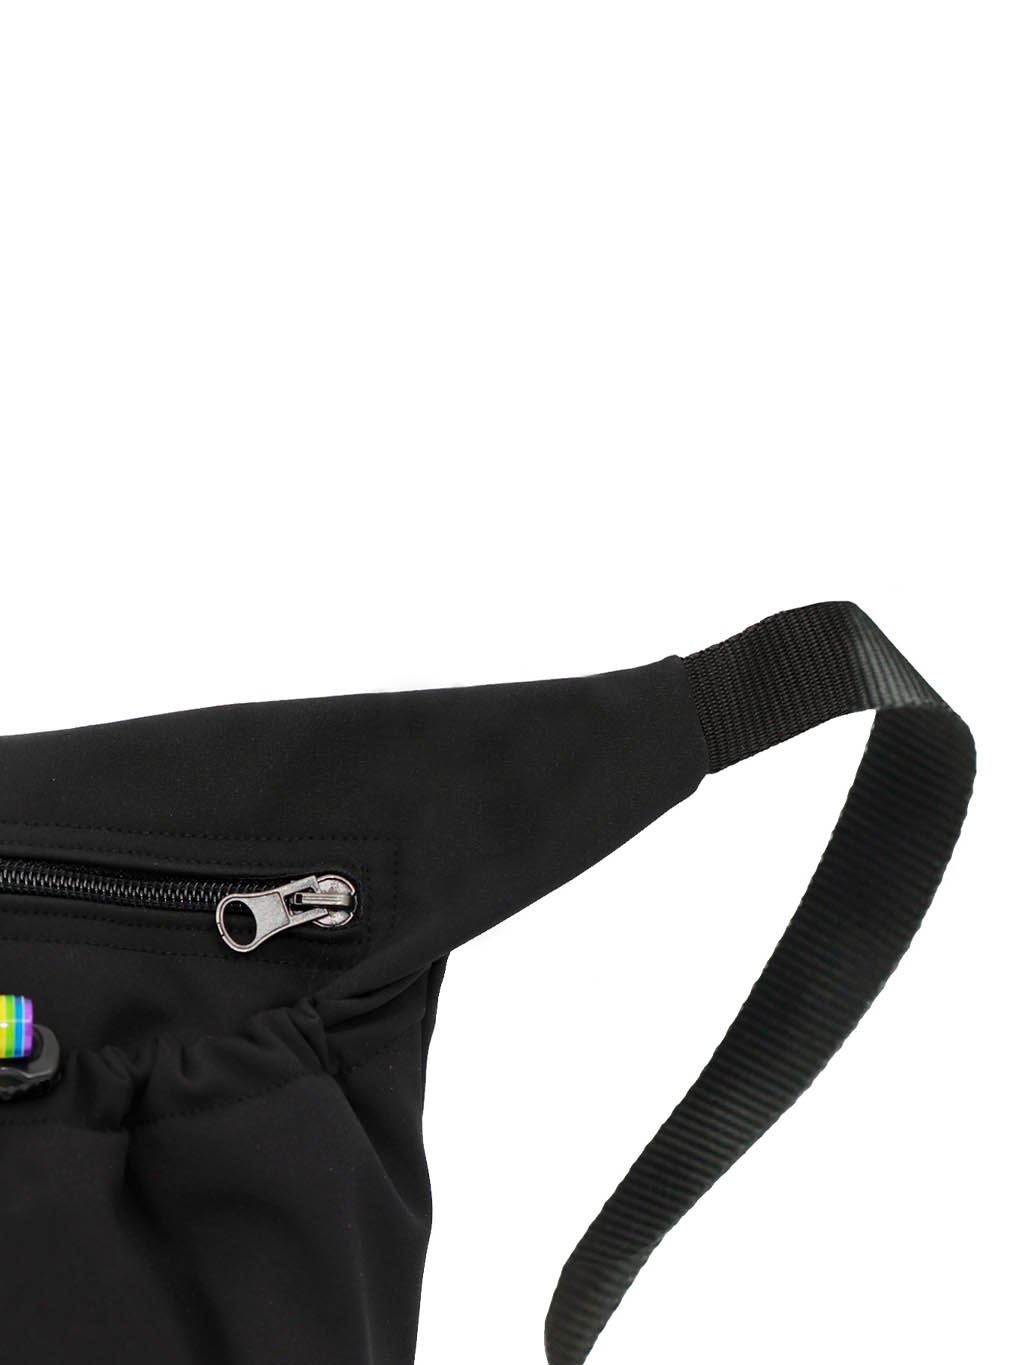 Dog training treat pouch 2 in 1 black